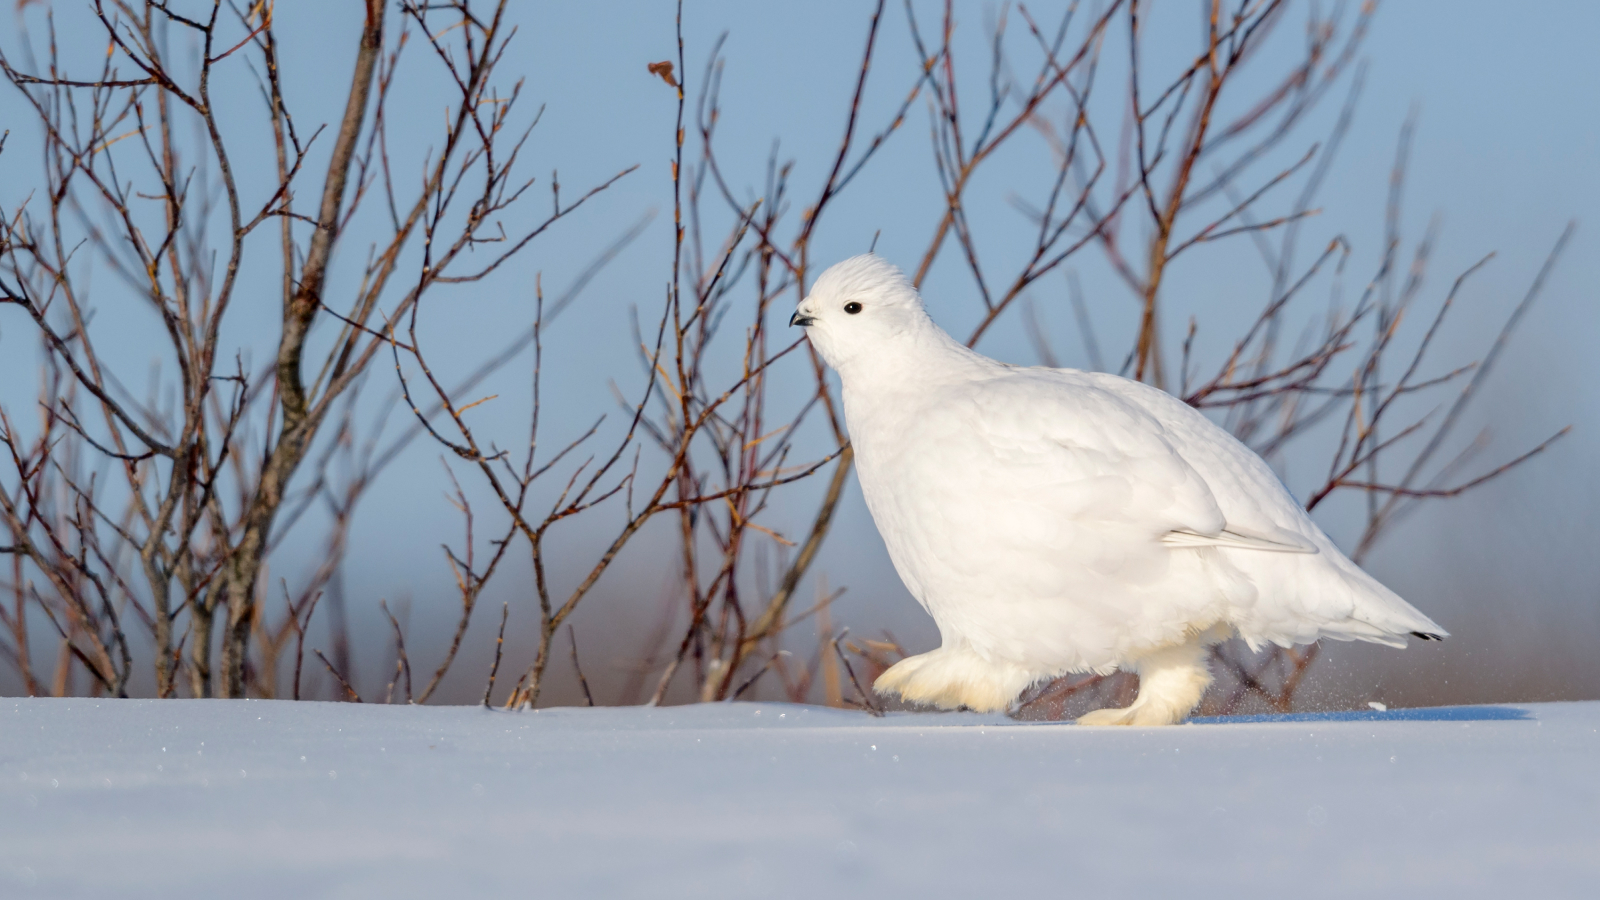 A white ptarmigan bird walks on top of the snow in front of a dried shrub